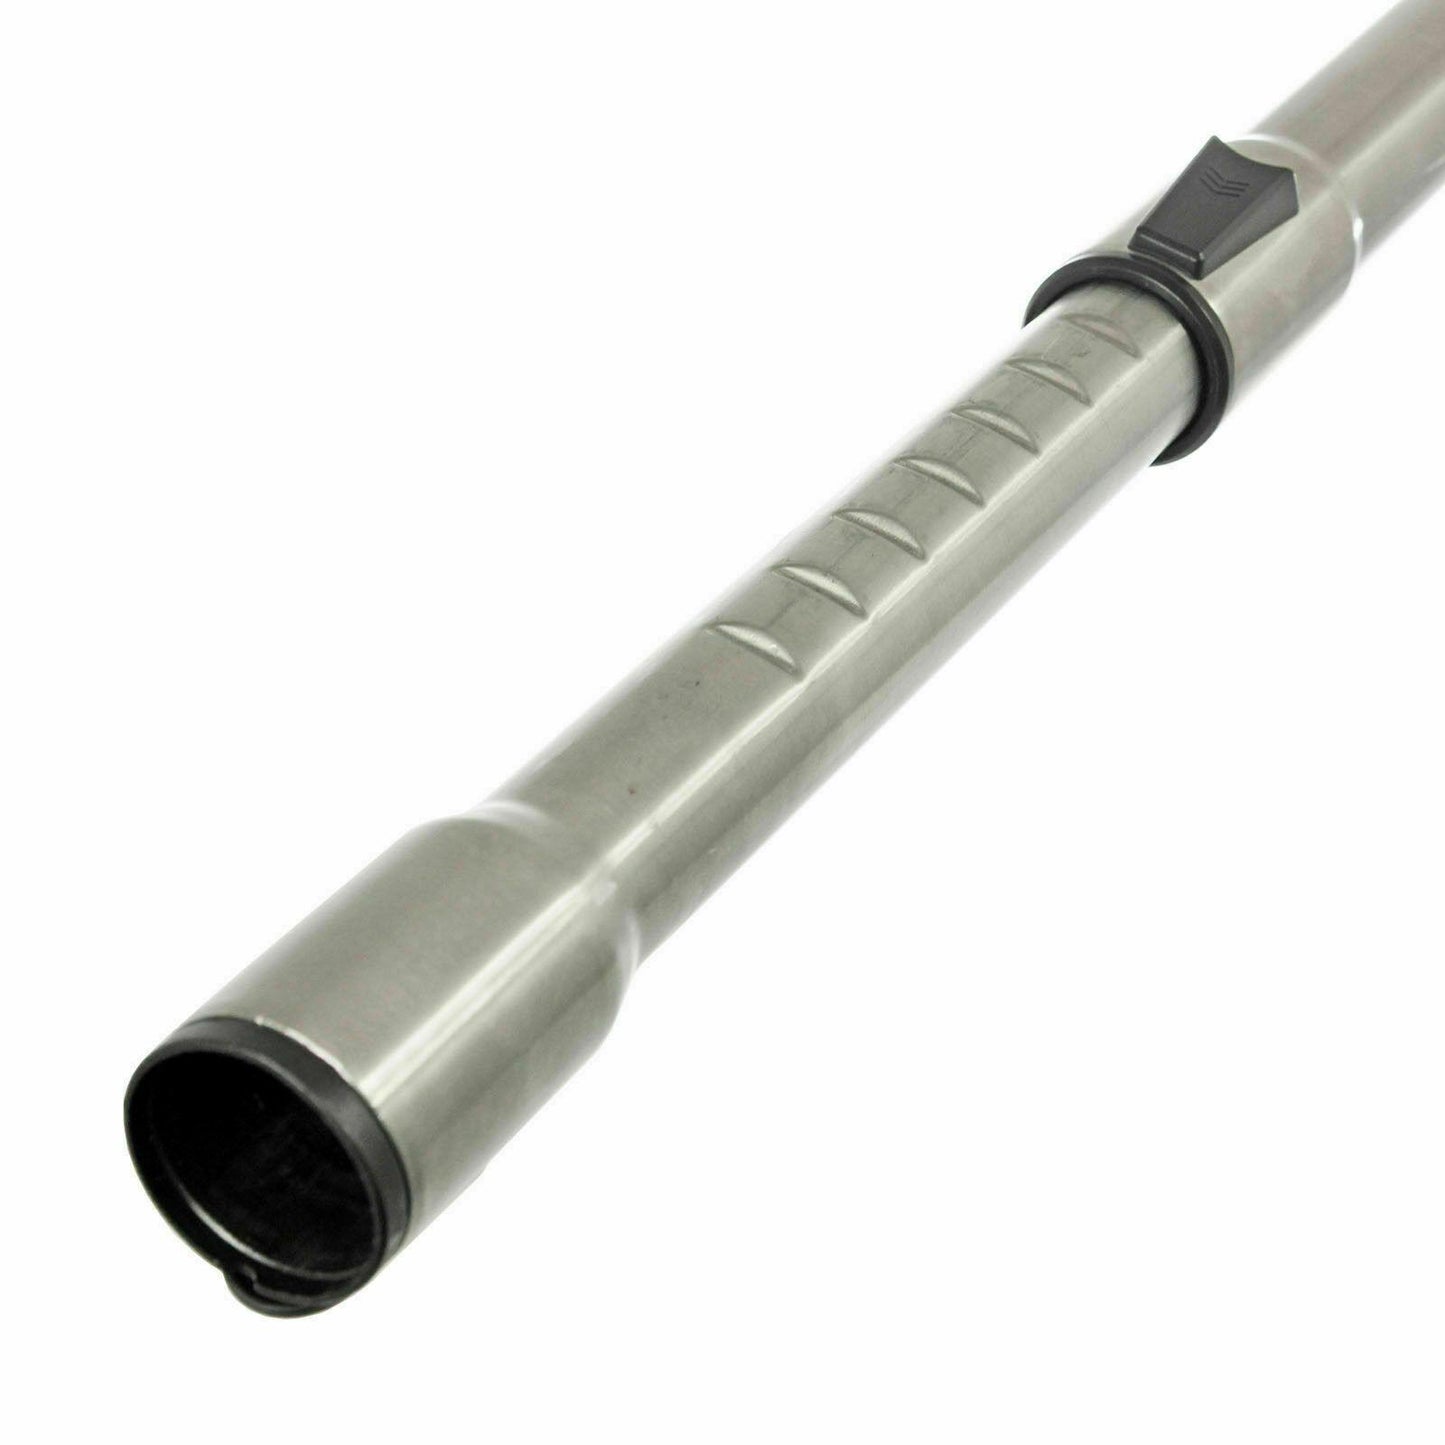 Vacuum Cleaner Telescopic Wand Tube For Miele Non Electric Compatible Heidelberg Sparesbarn